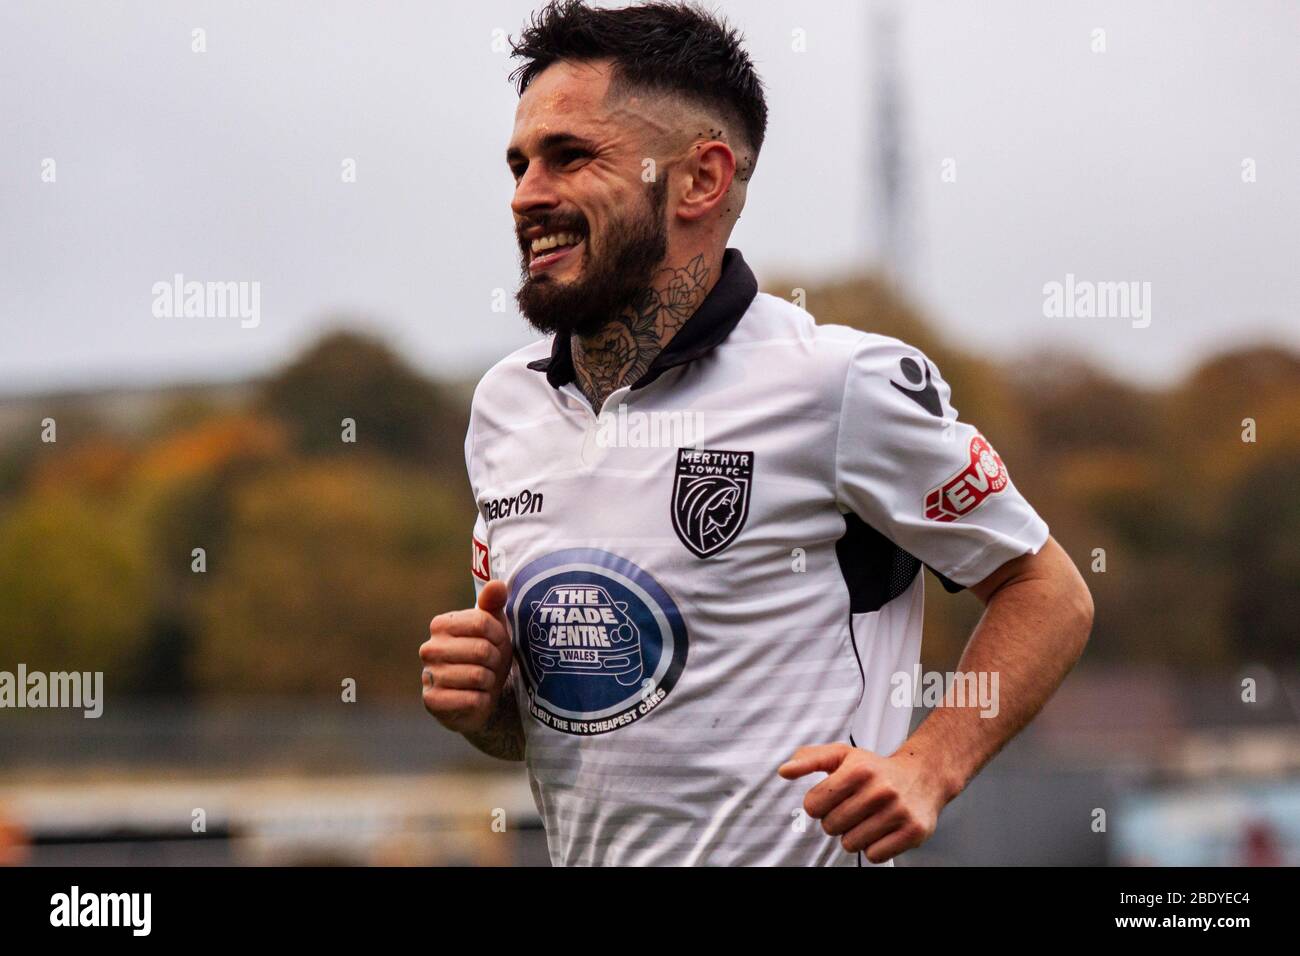 ian Traylor of Merthyr Town in action. Merthyr Town v Cinderford at Penydarren Park in the FA Cup on the 29th October 2016. Stock Photo